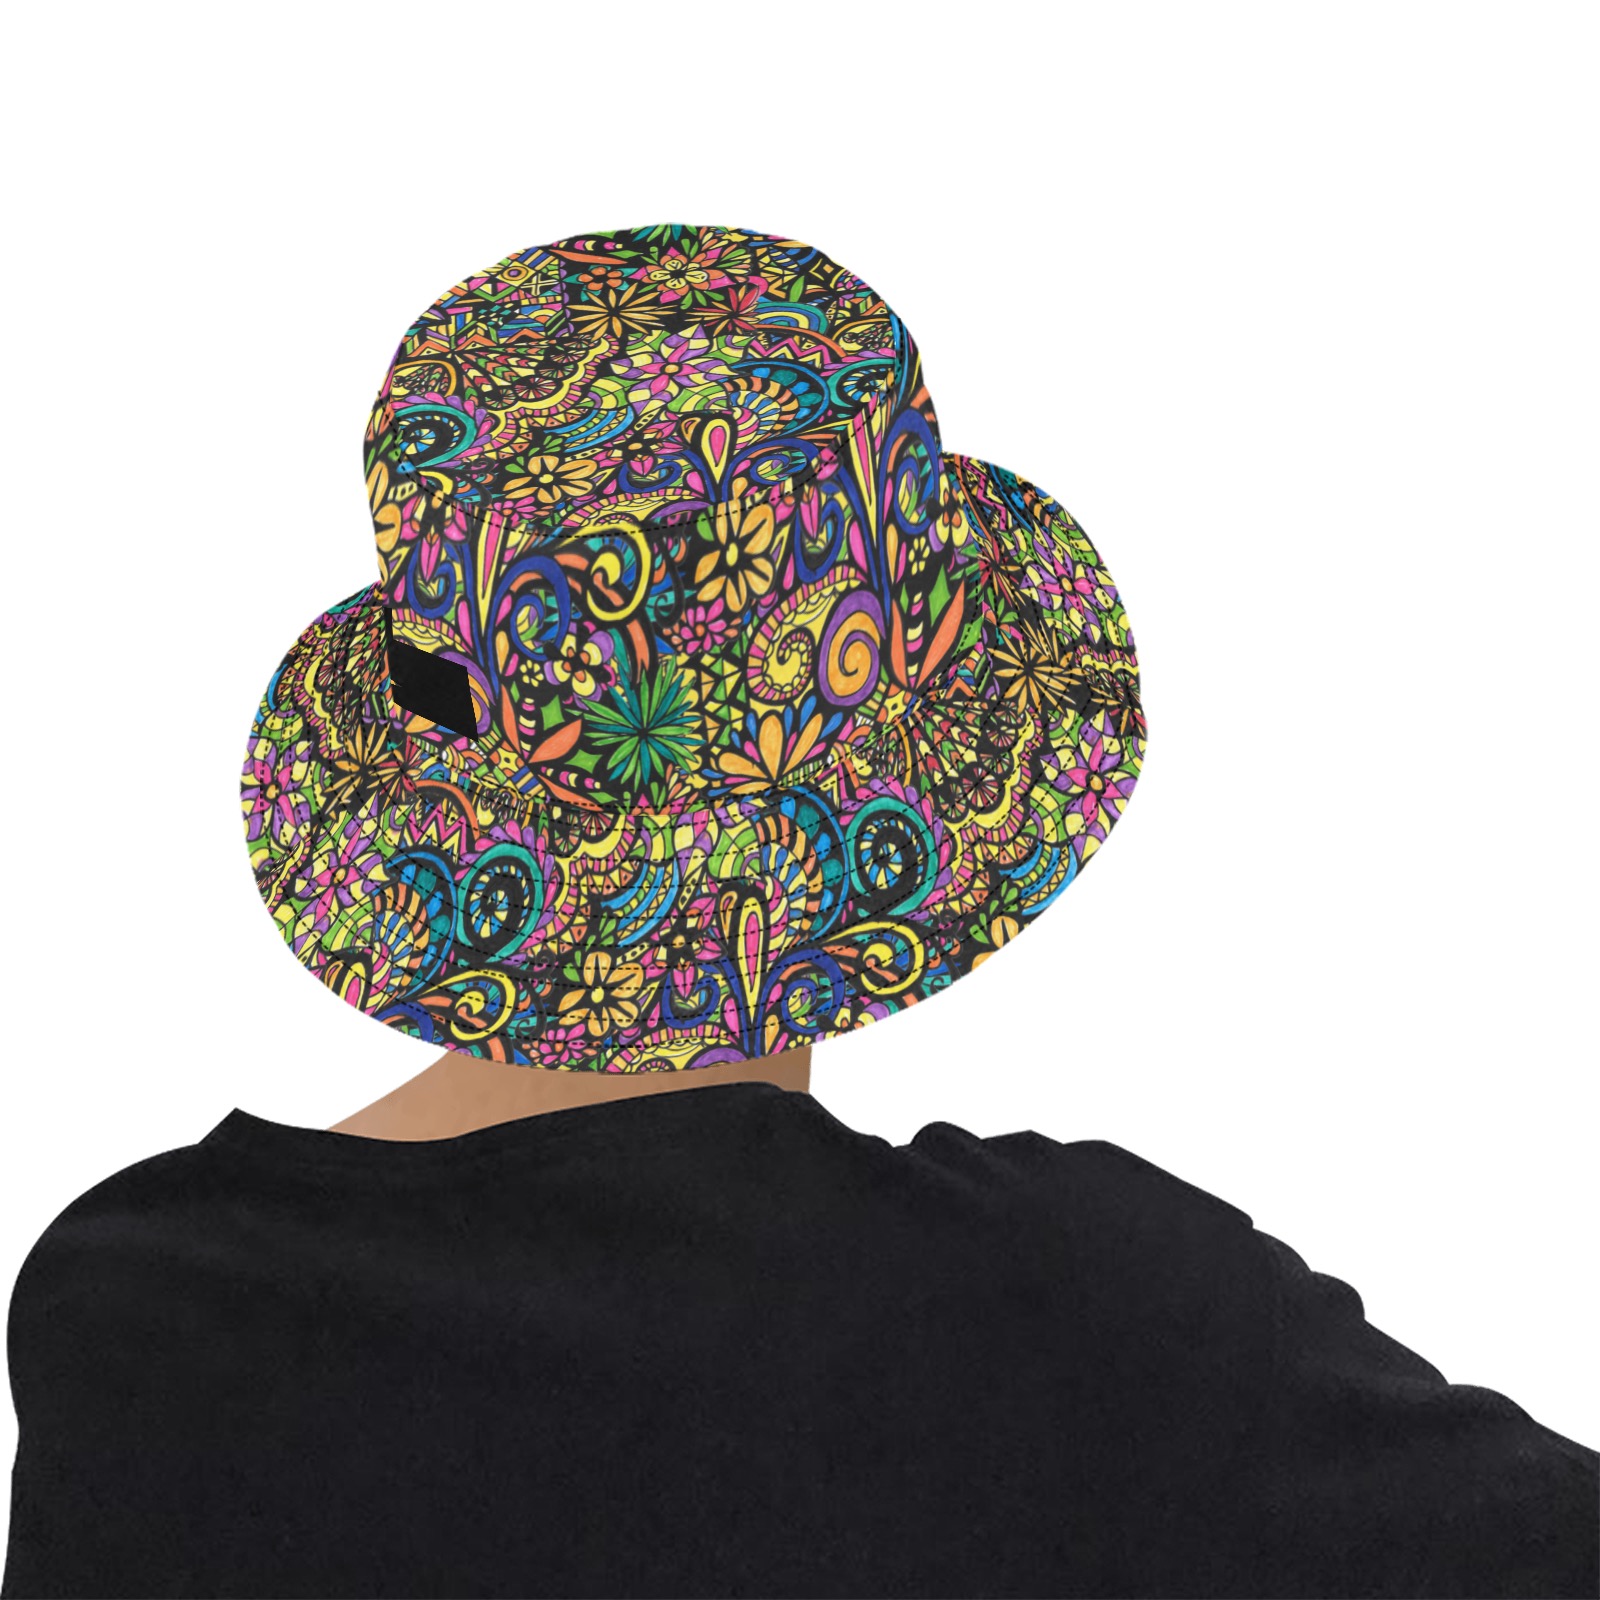 Life's a Circus Unisex Summer Bucket Hat